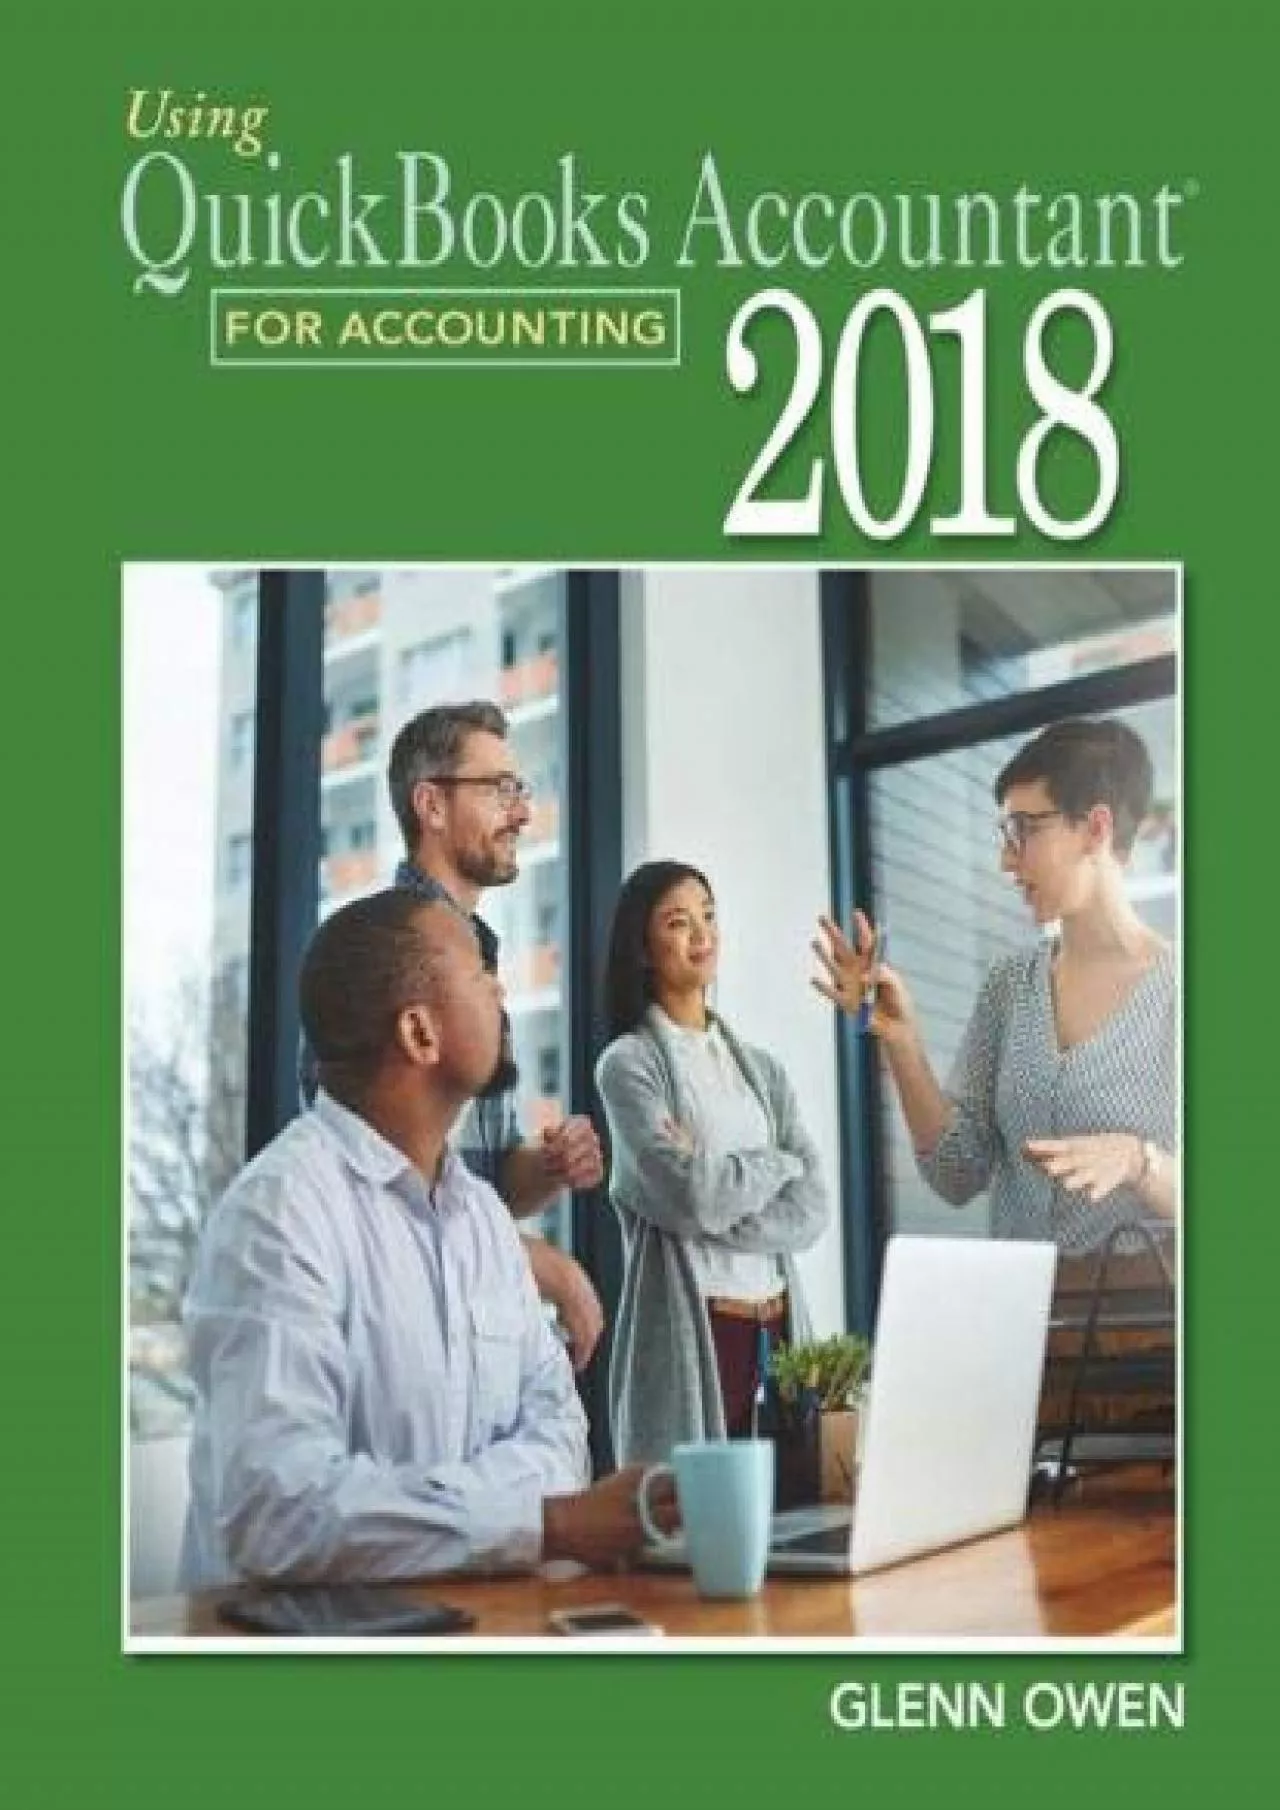 (DOWNLOAD)-Using QuickBooks Accountant 2018 for Accounting (with Quickbooks Desktop 2018